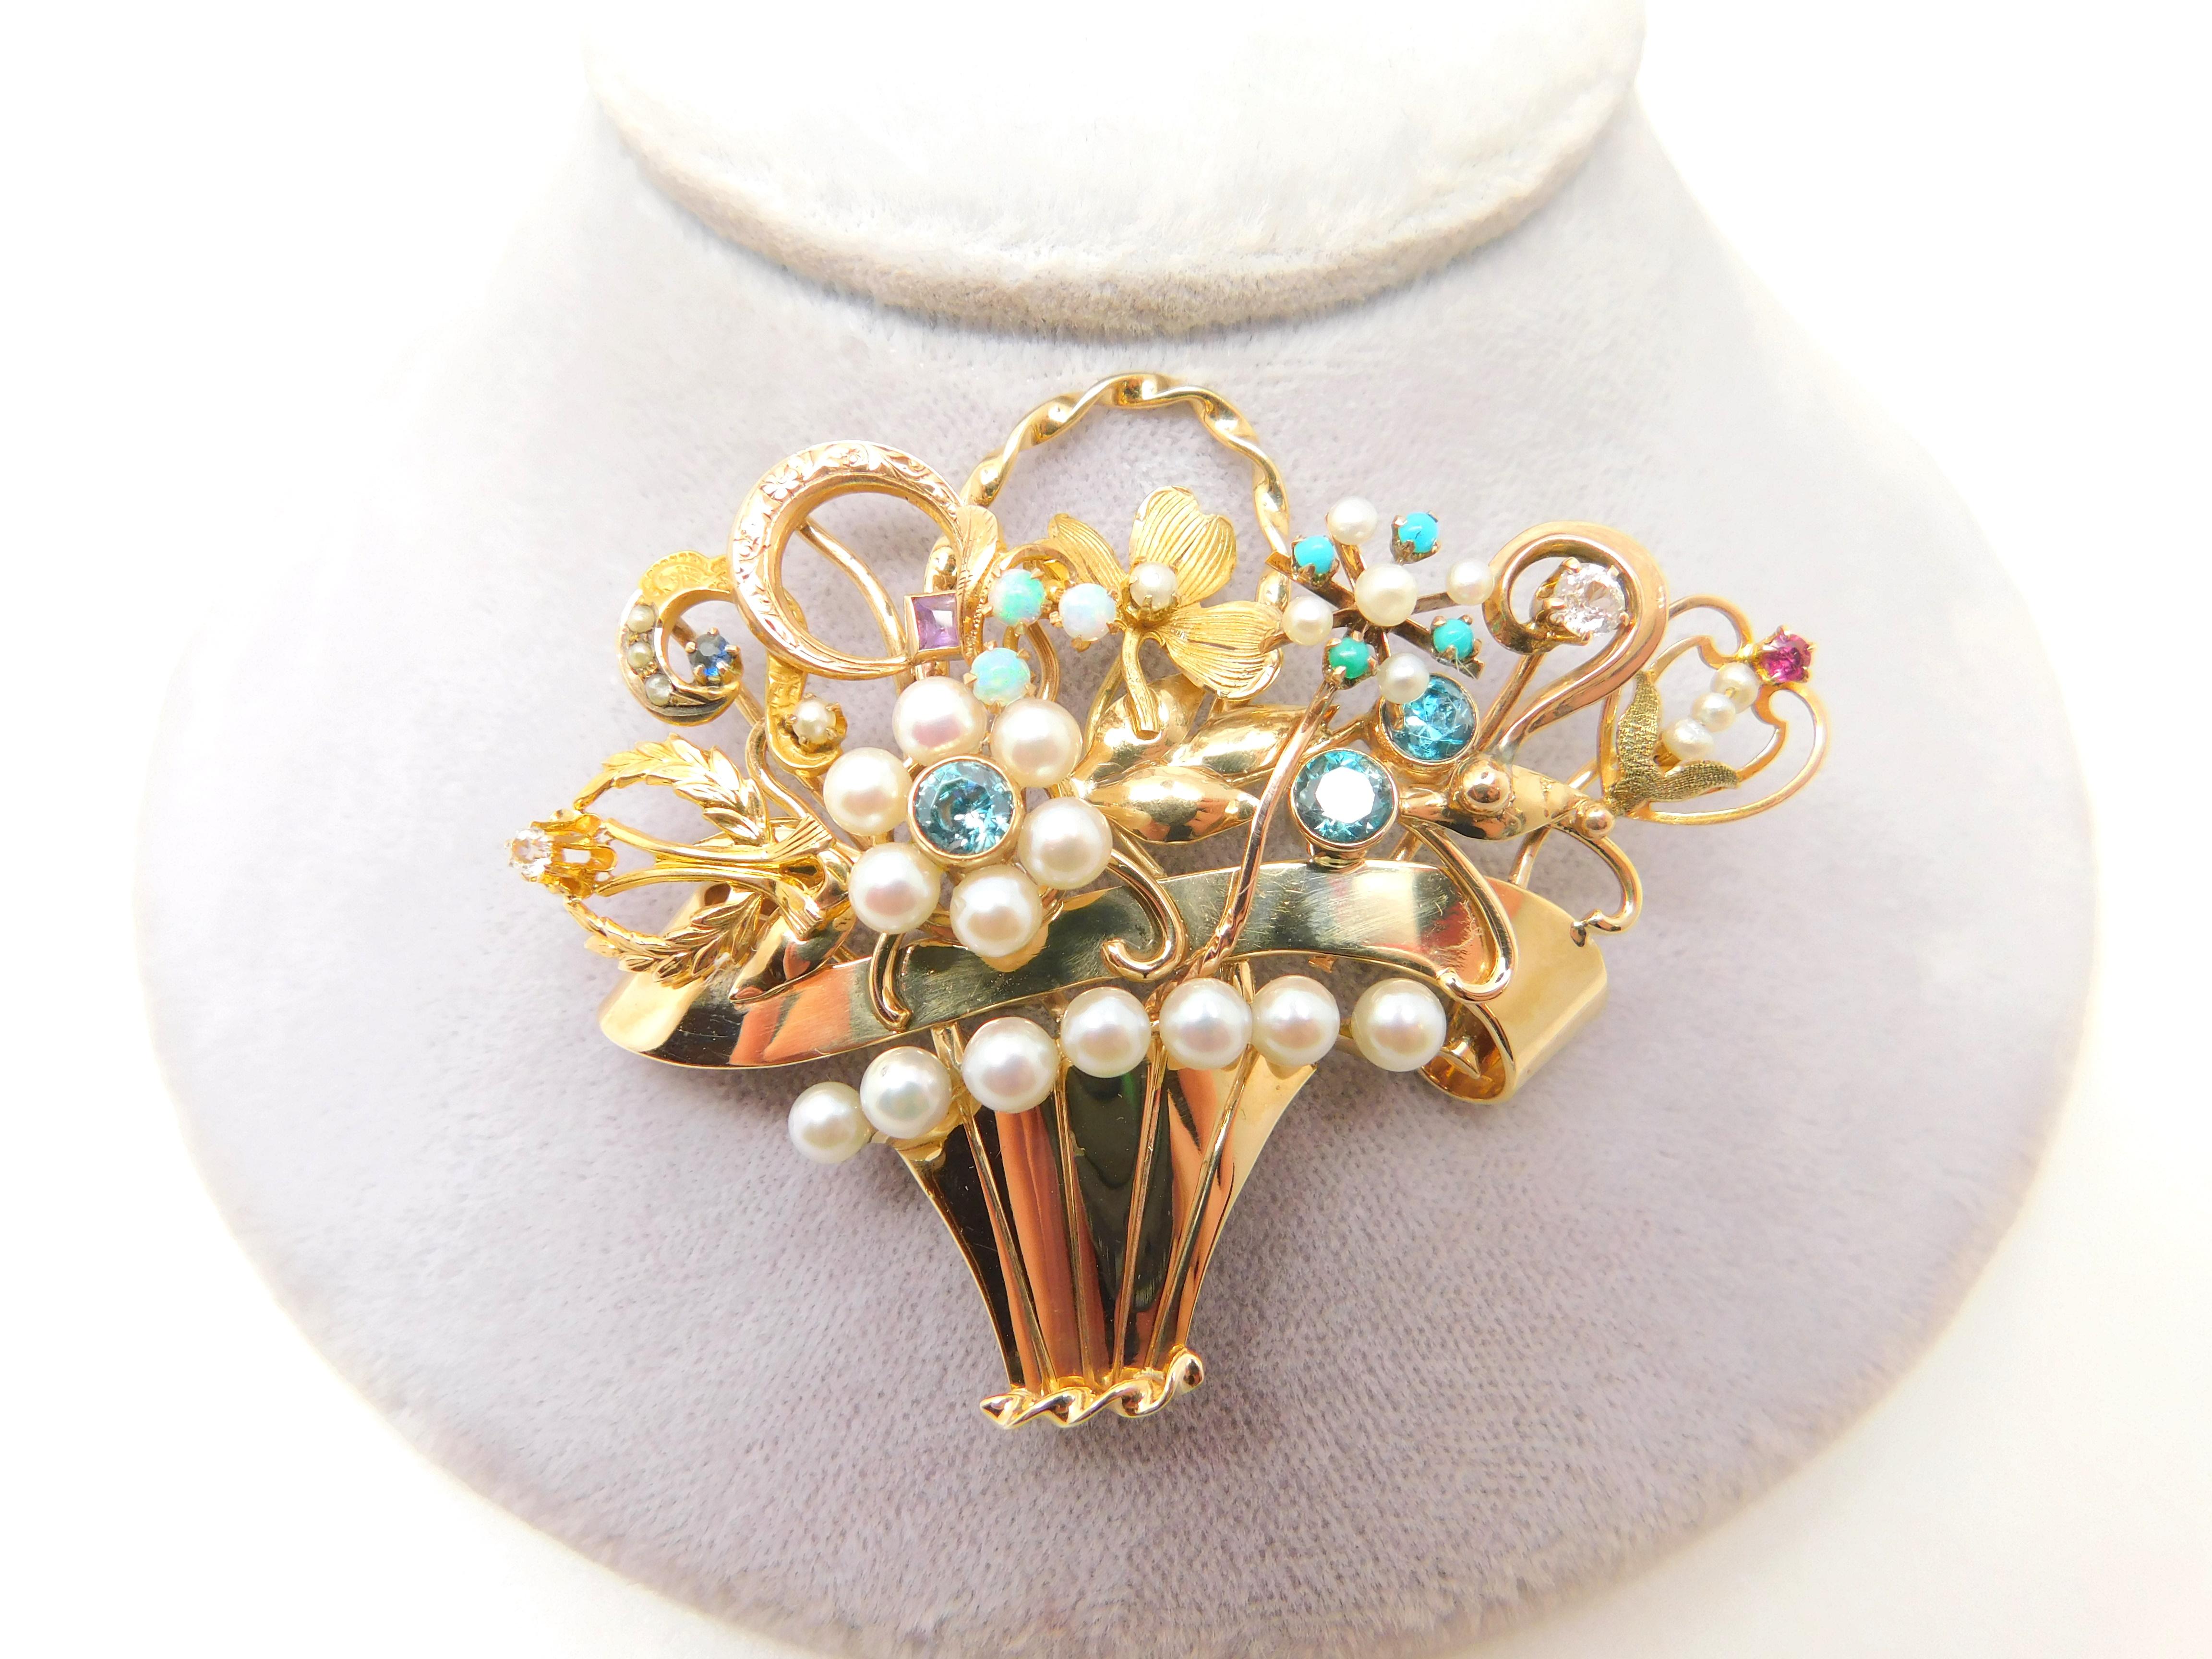 Beautiful 14K yellow gold stick pin collection flower basket brooch.  The pin has 8 stick pins including: blue zircon, cultured pearls, opals, turquoise, diamond, amethyst, sapphire, bird with ruby, and more.  The pearls range from seed pearls